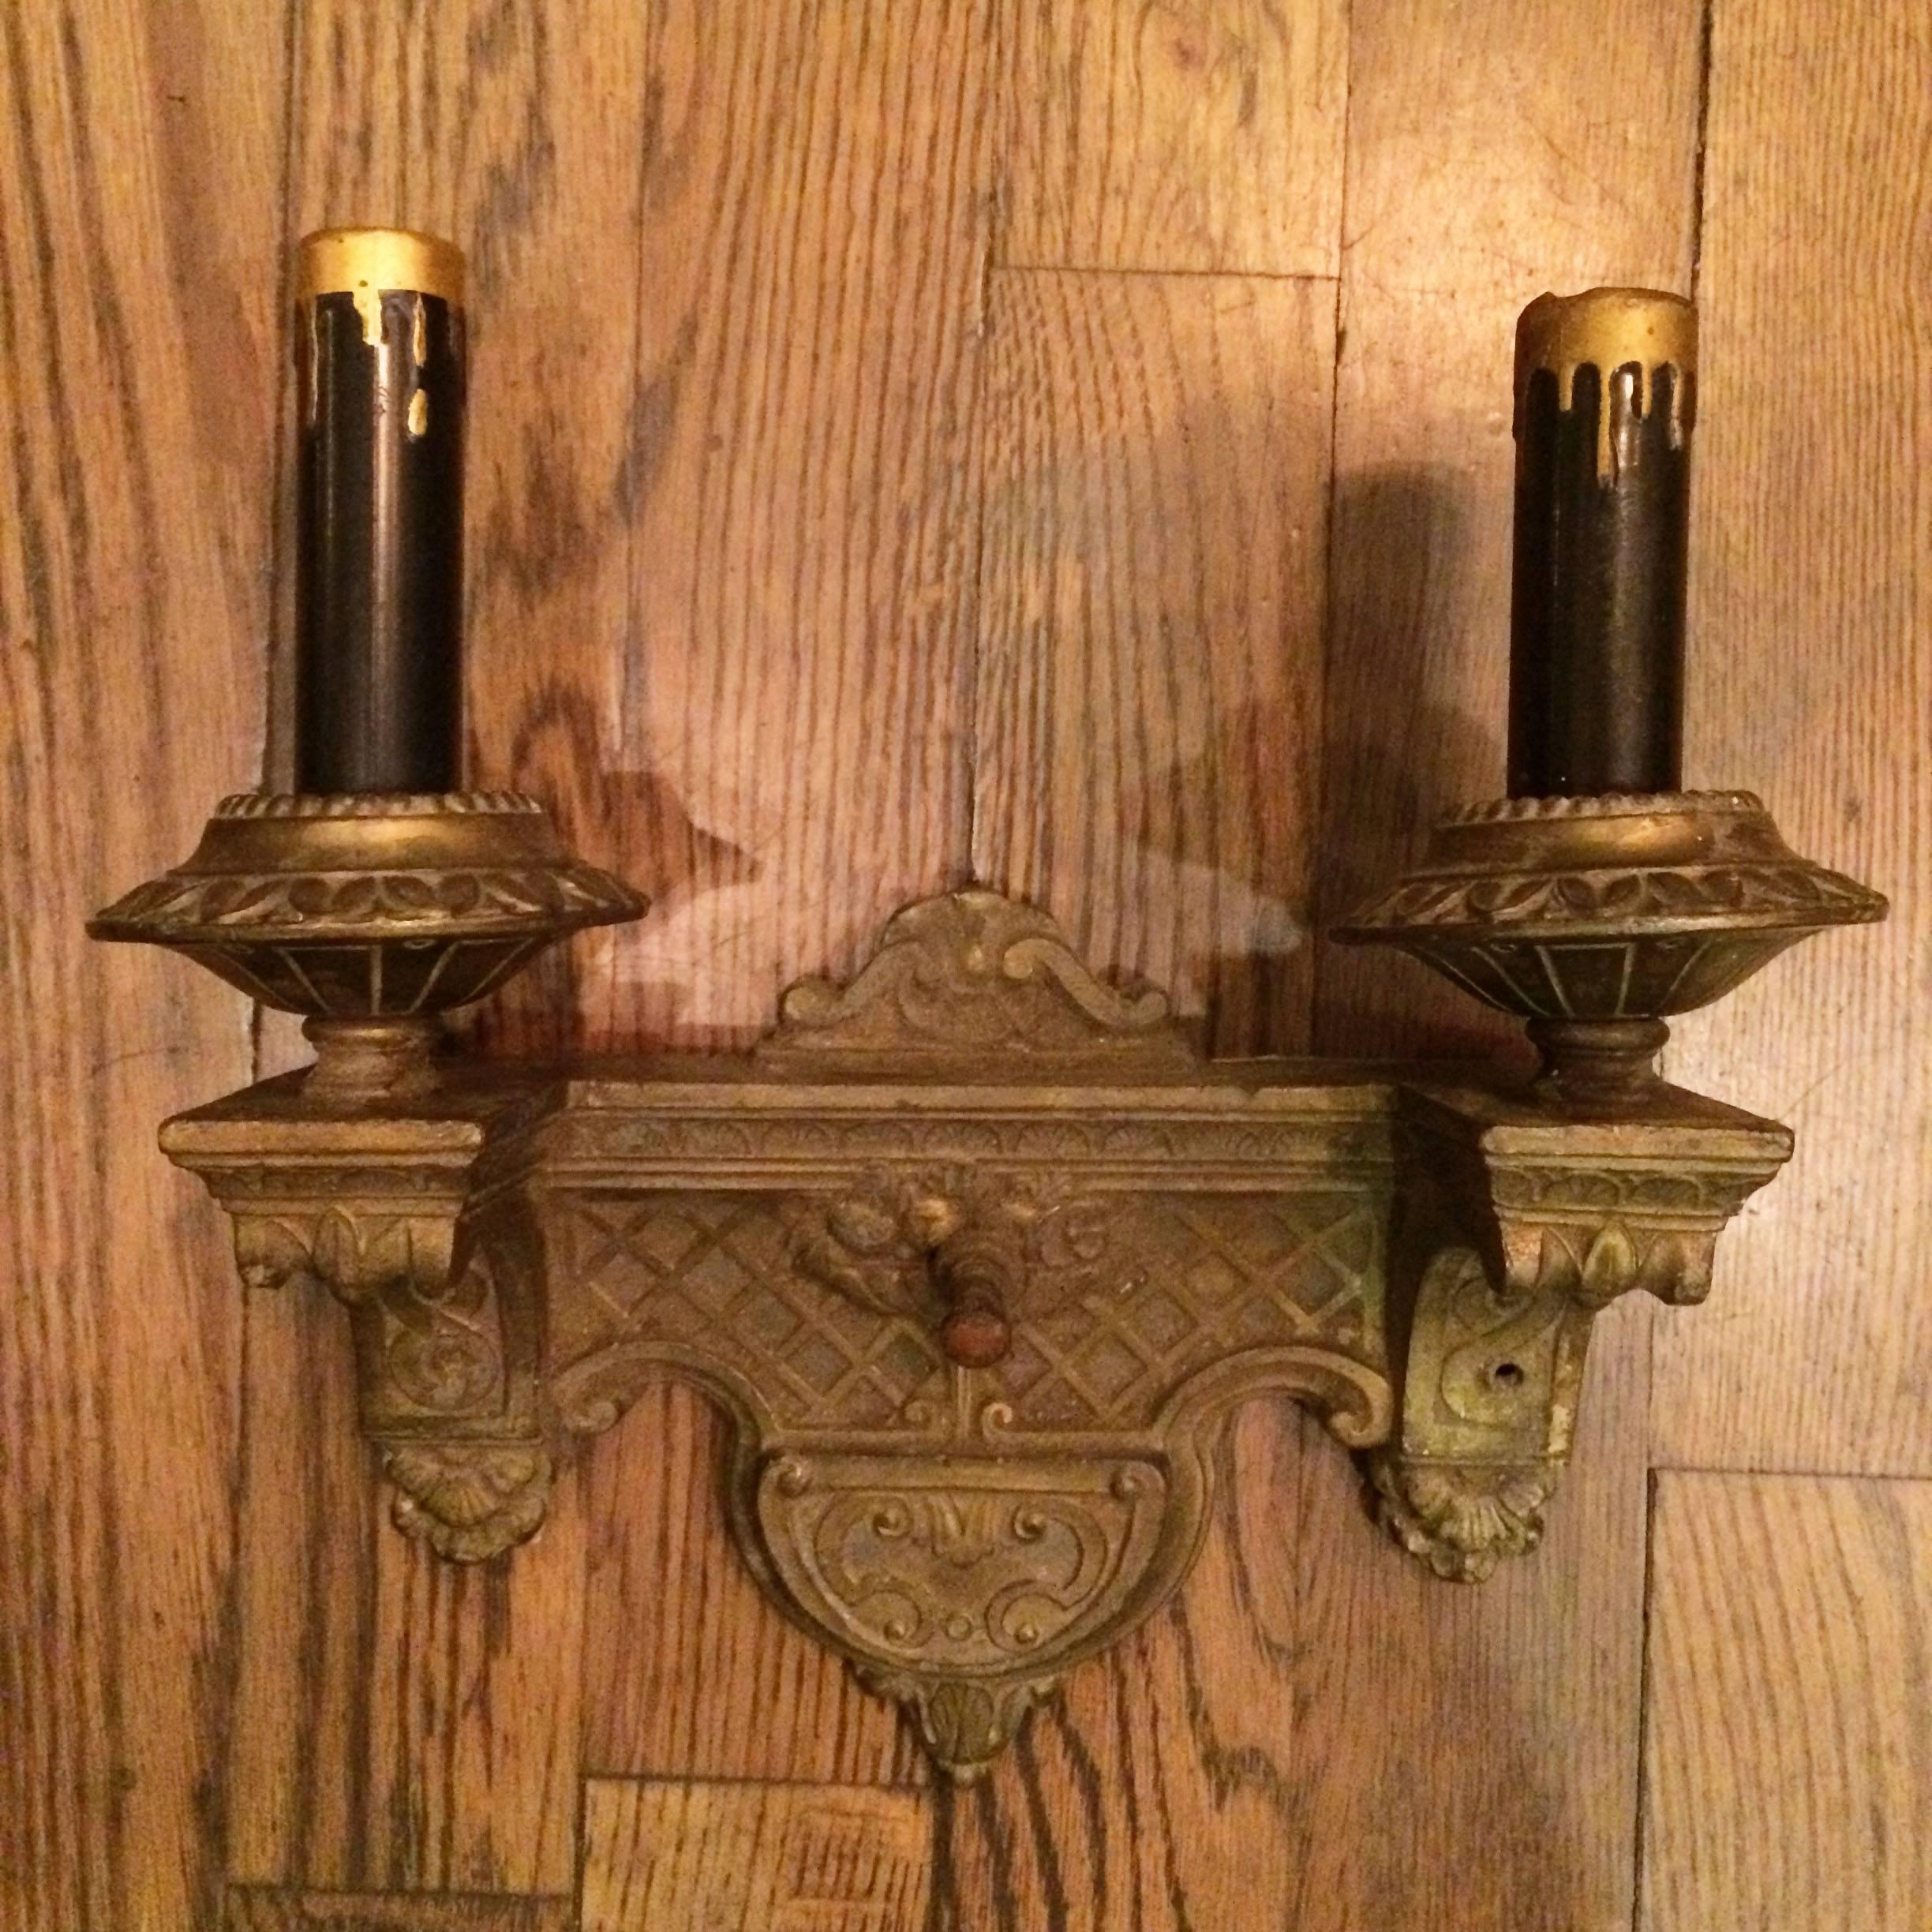 Pair of Art Deco, cast, white metal, wall sconces with switches and two arms on each sconce that accept candelabra bulbs.